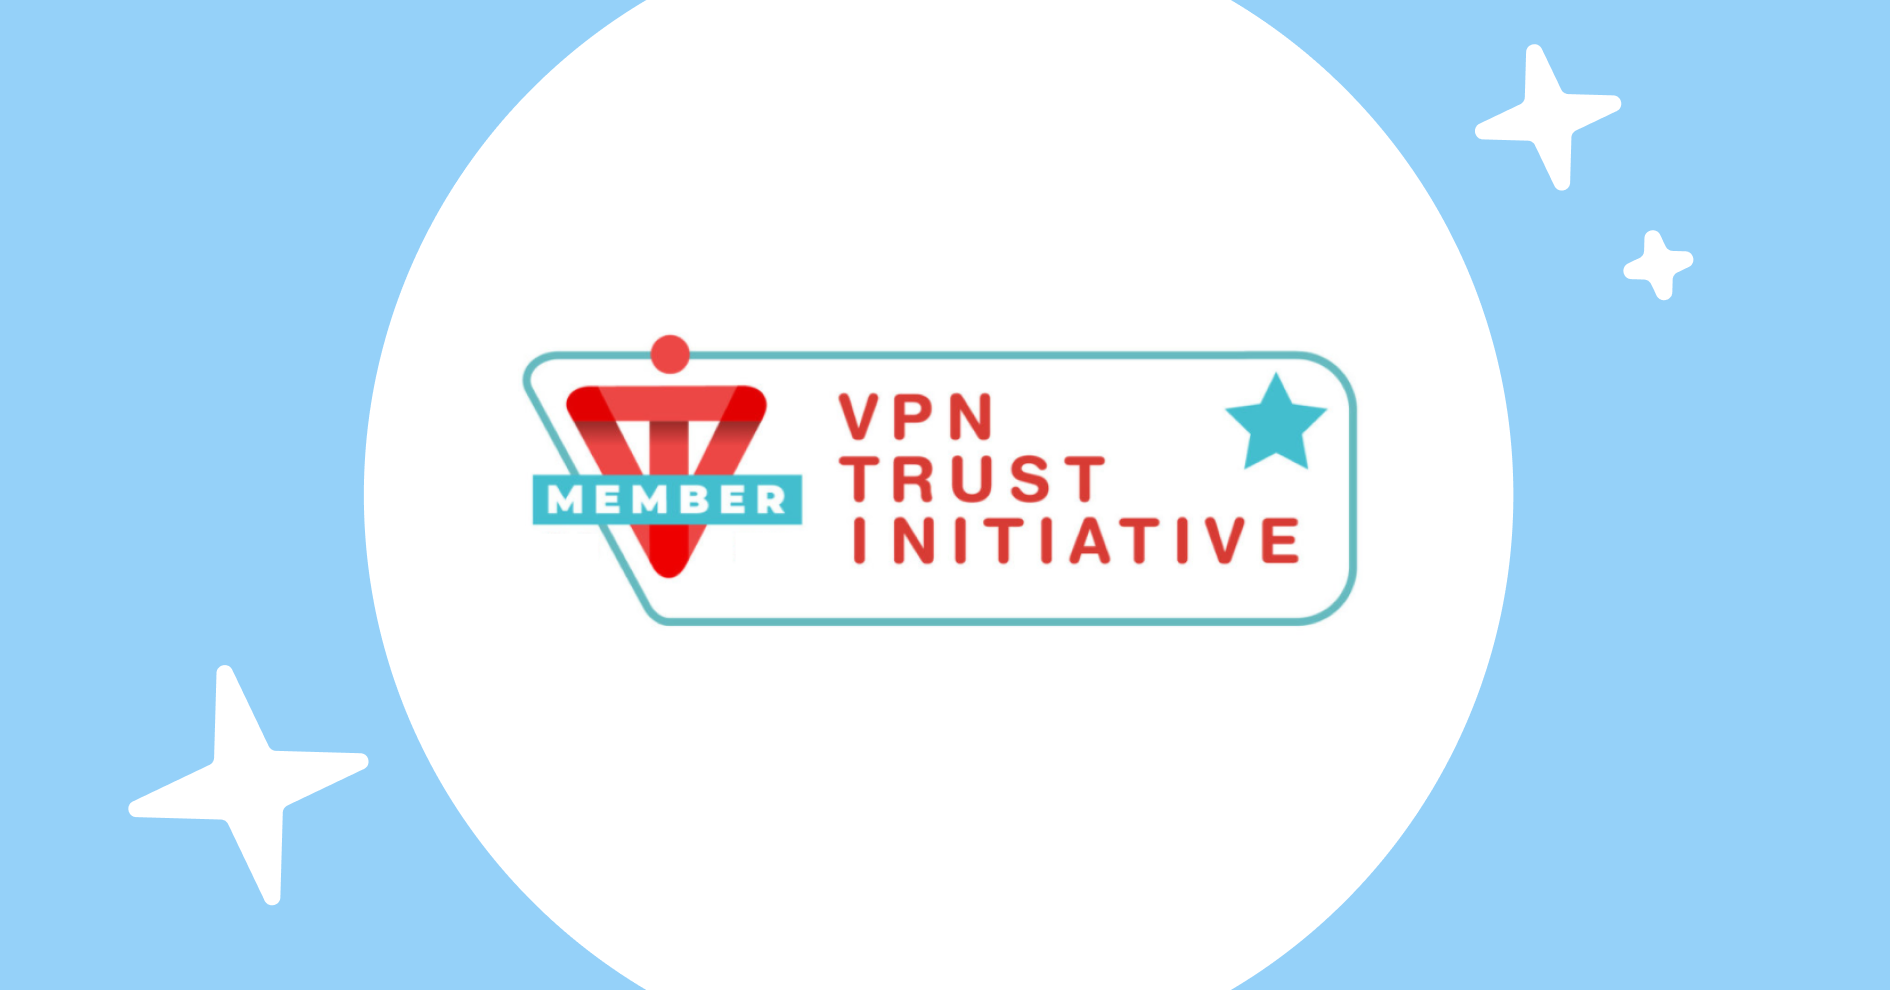 Our commitment to the VPN Trust Seal accreditation program